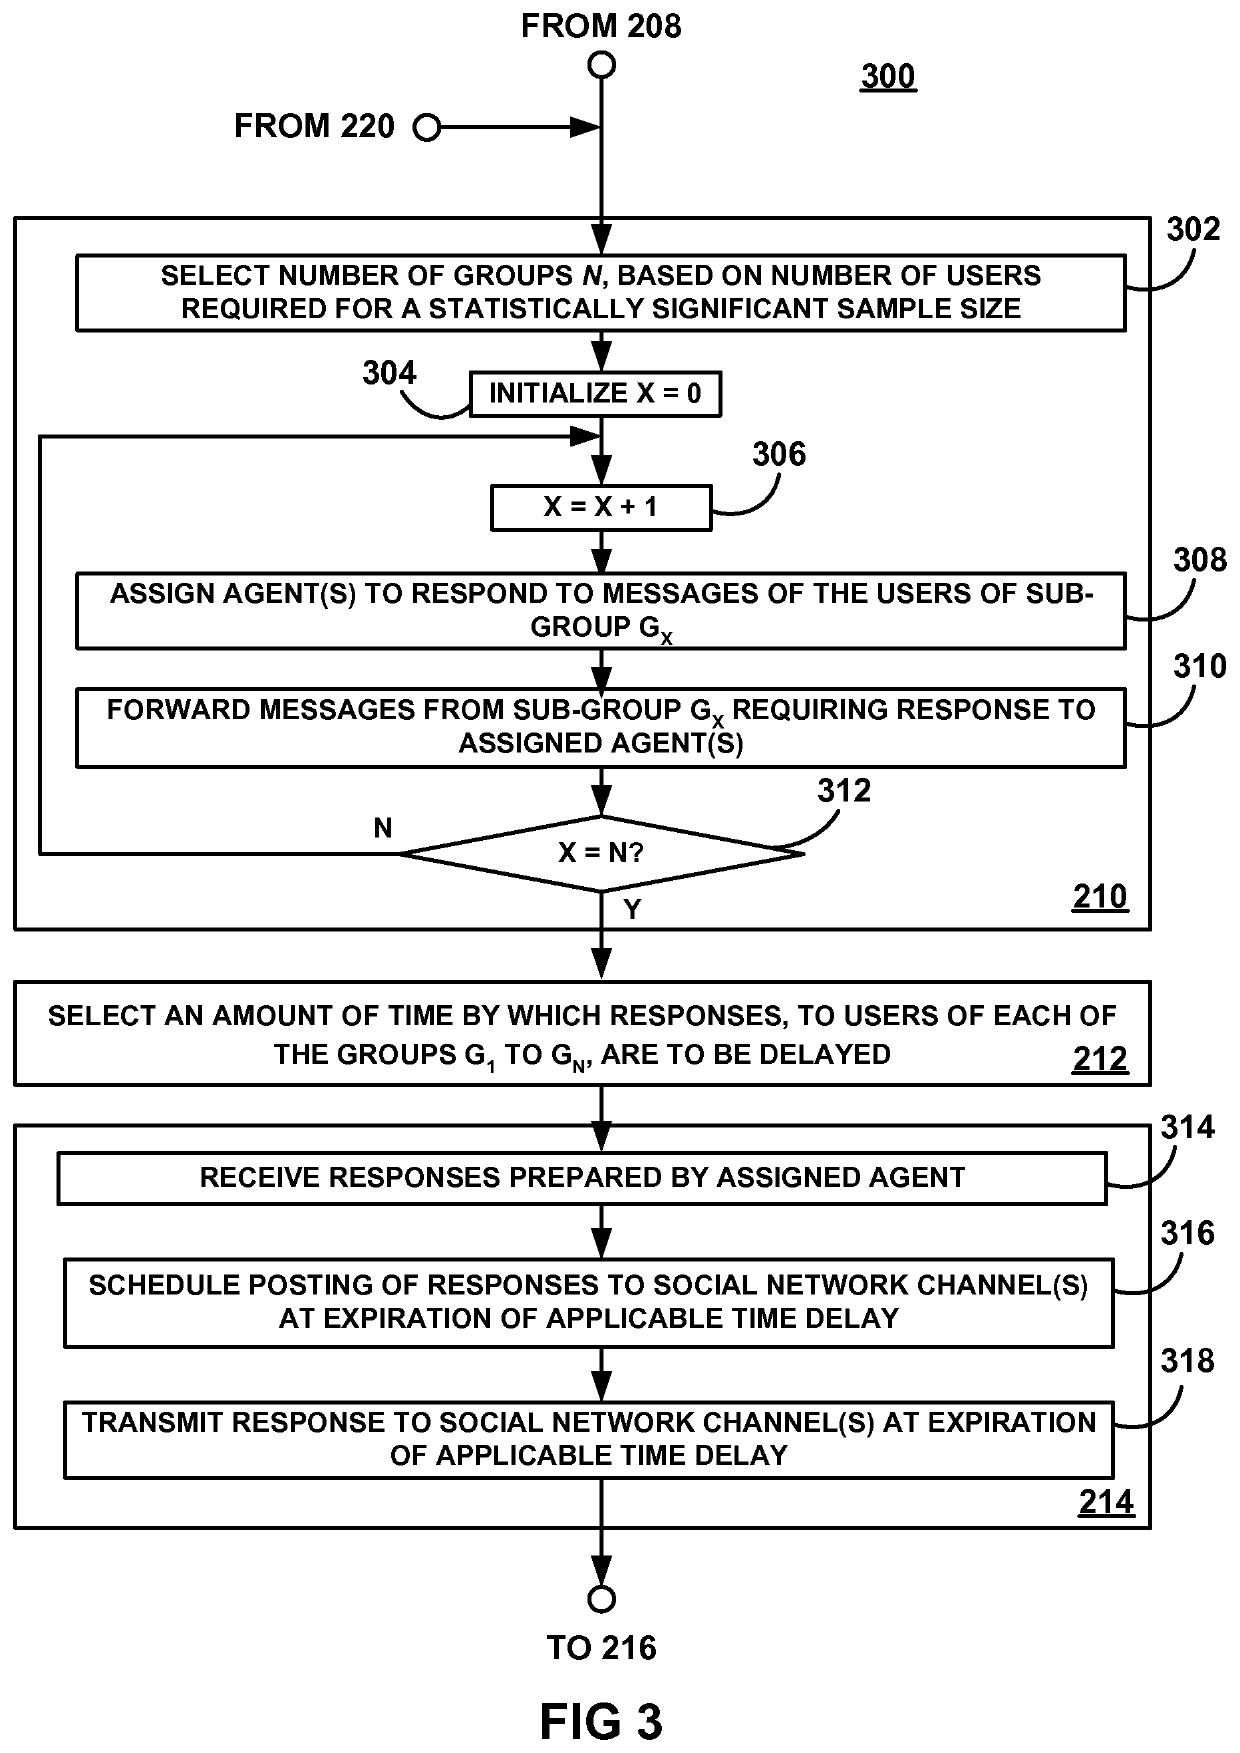 System and method for assessing the sensitivity of social network user populations to response time delays